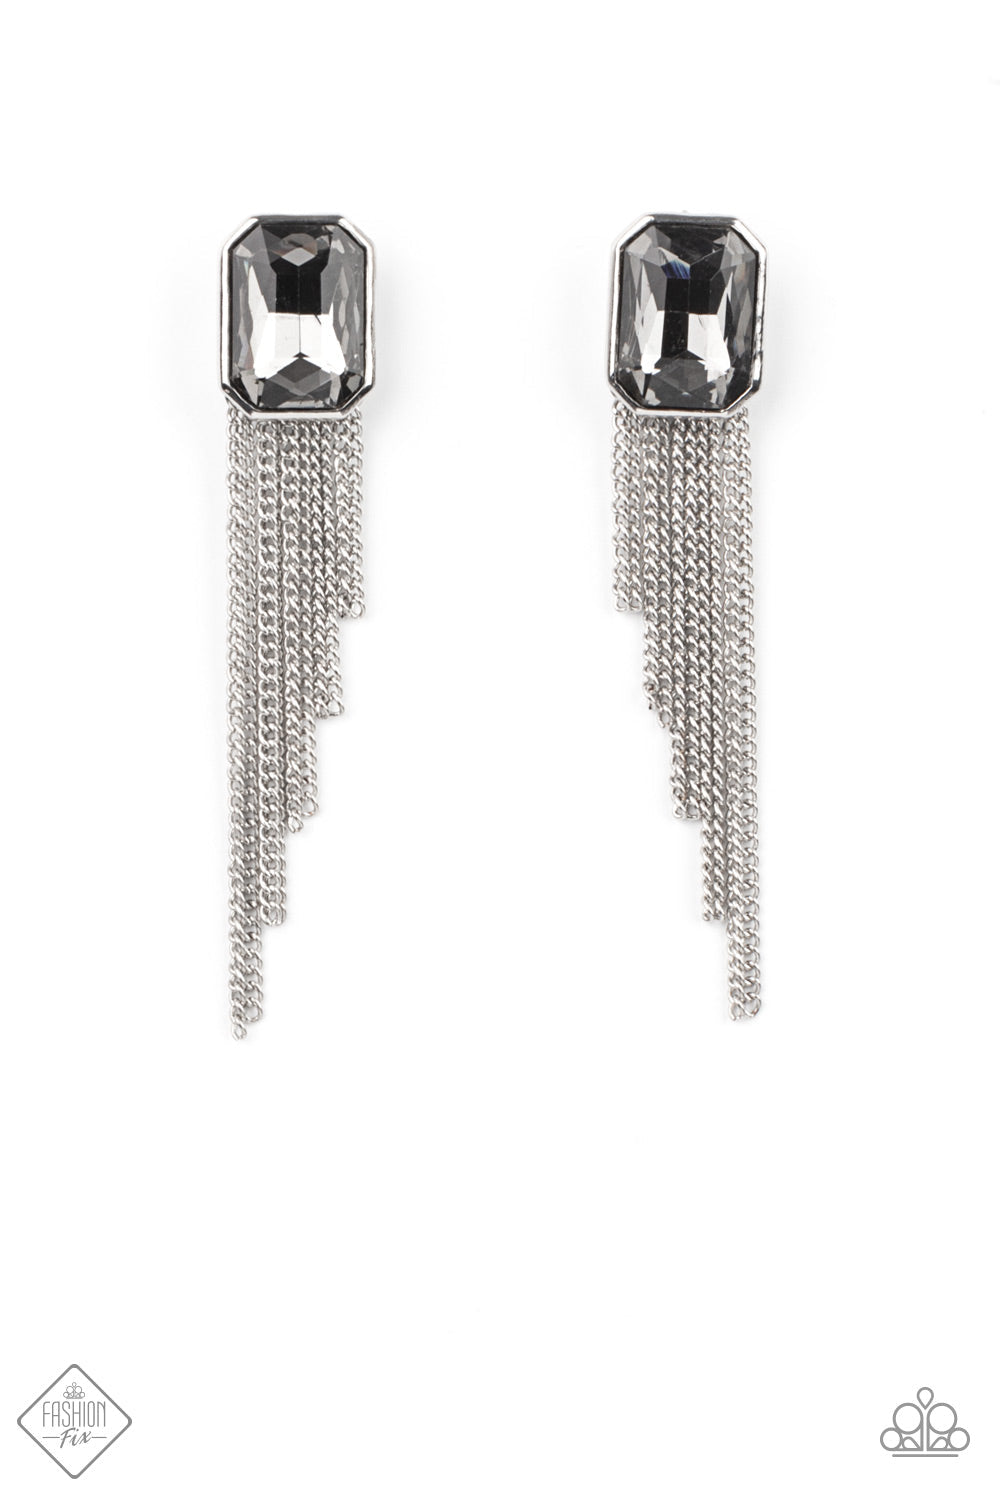 Save for a REIGNy Day - Silver Fashion Earrings - Paparazzi Accessories - Tapered silver chains stream from the bottom of an oversized smoky emerald cut gem, creating a regal fringe. Earring attaches to a standard post fitting. Sold as one pair of post earrings.